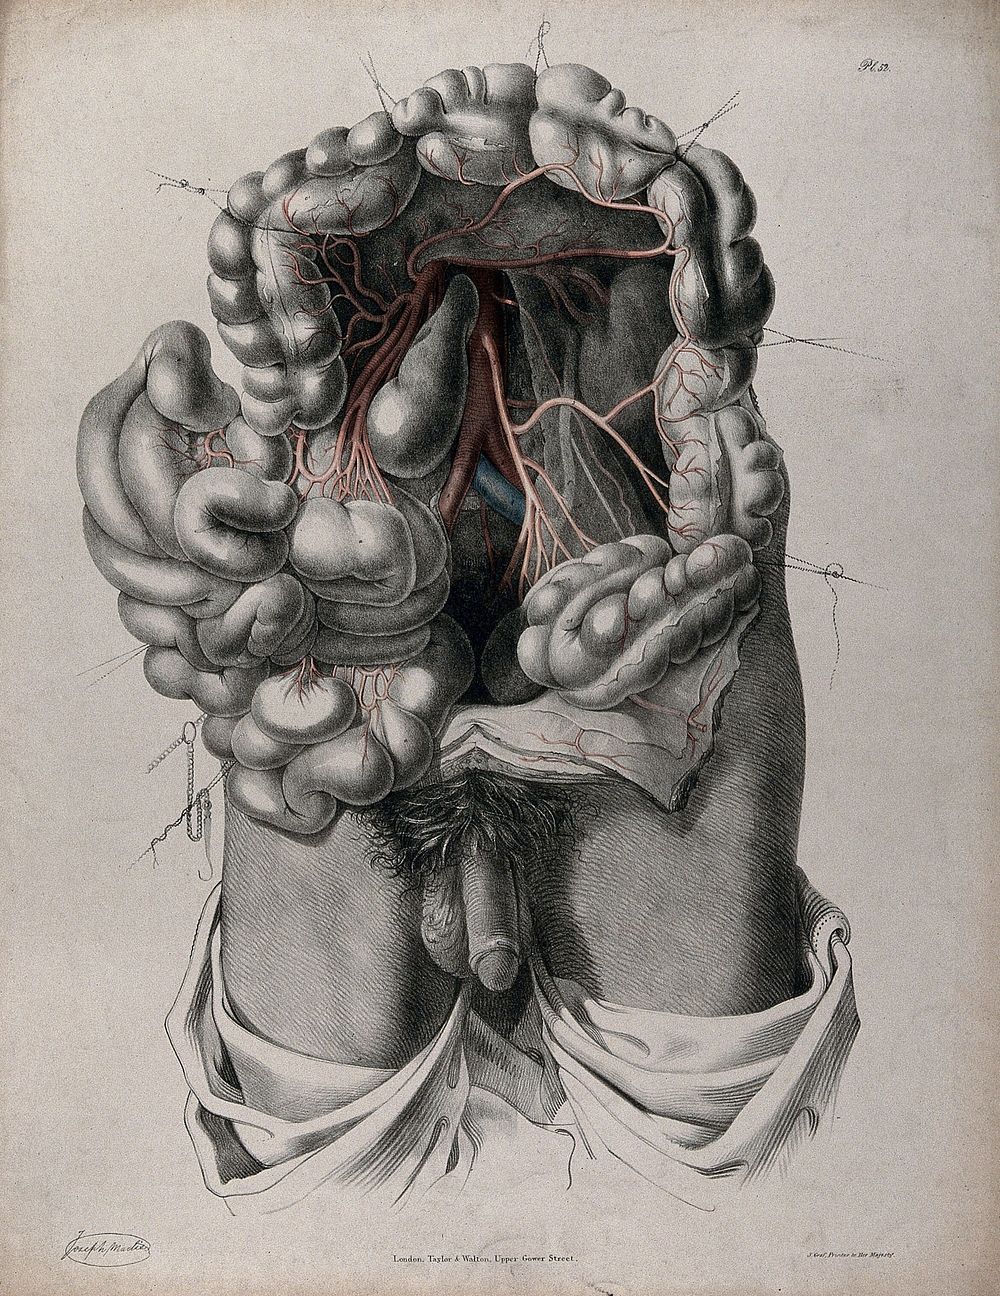 The circulatory system: dissection of the abdomen showing the large intestine, with the arteries and veins indicated in red…